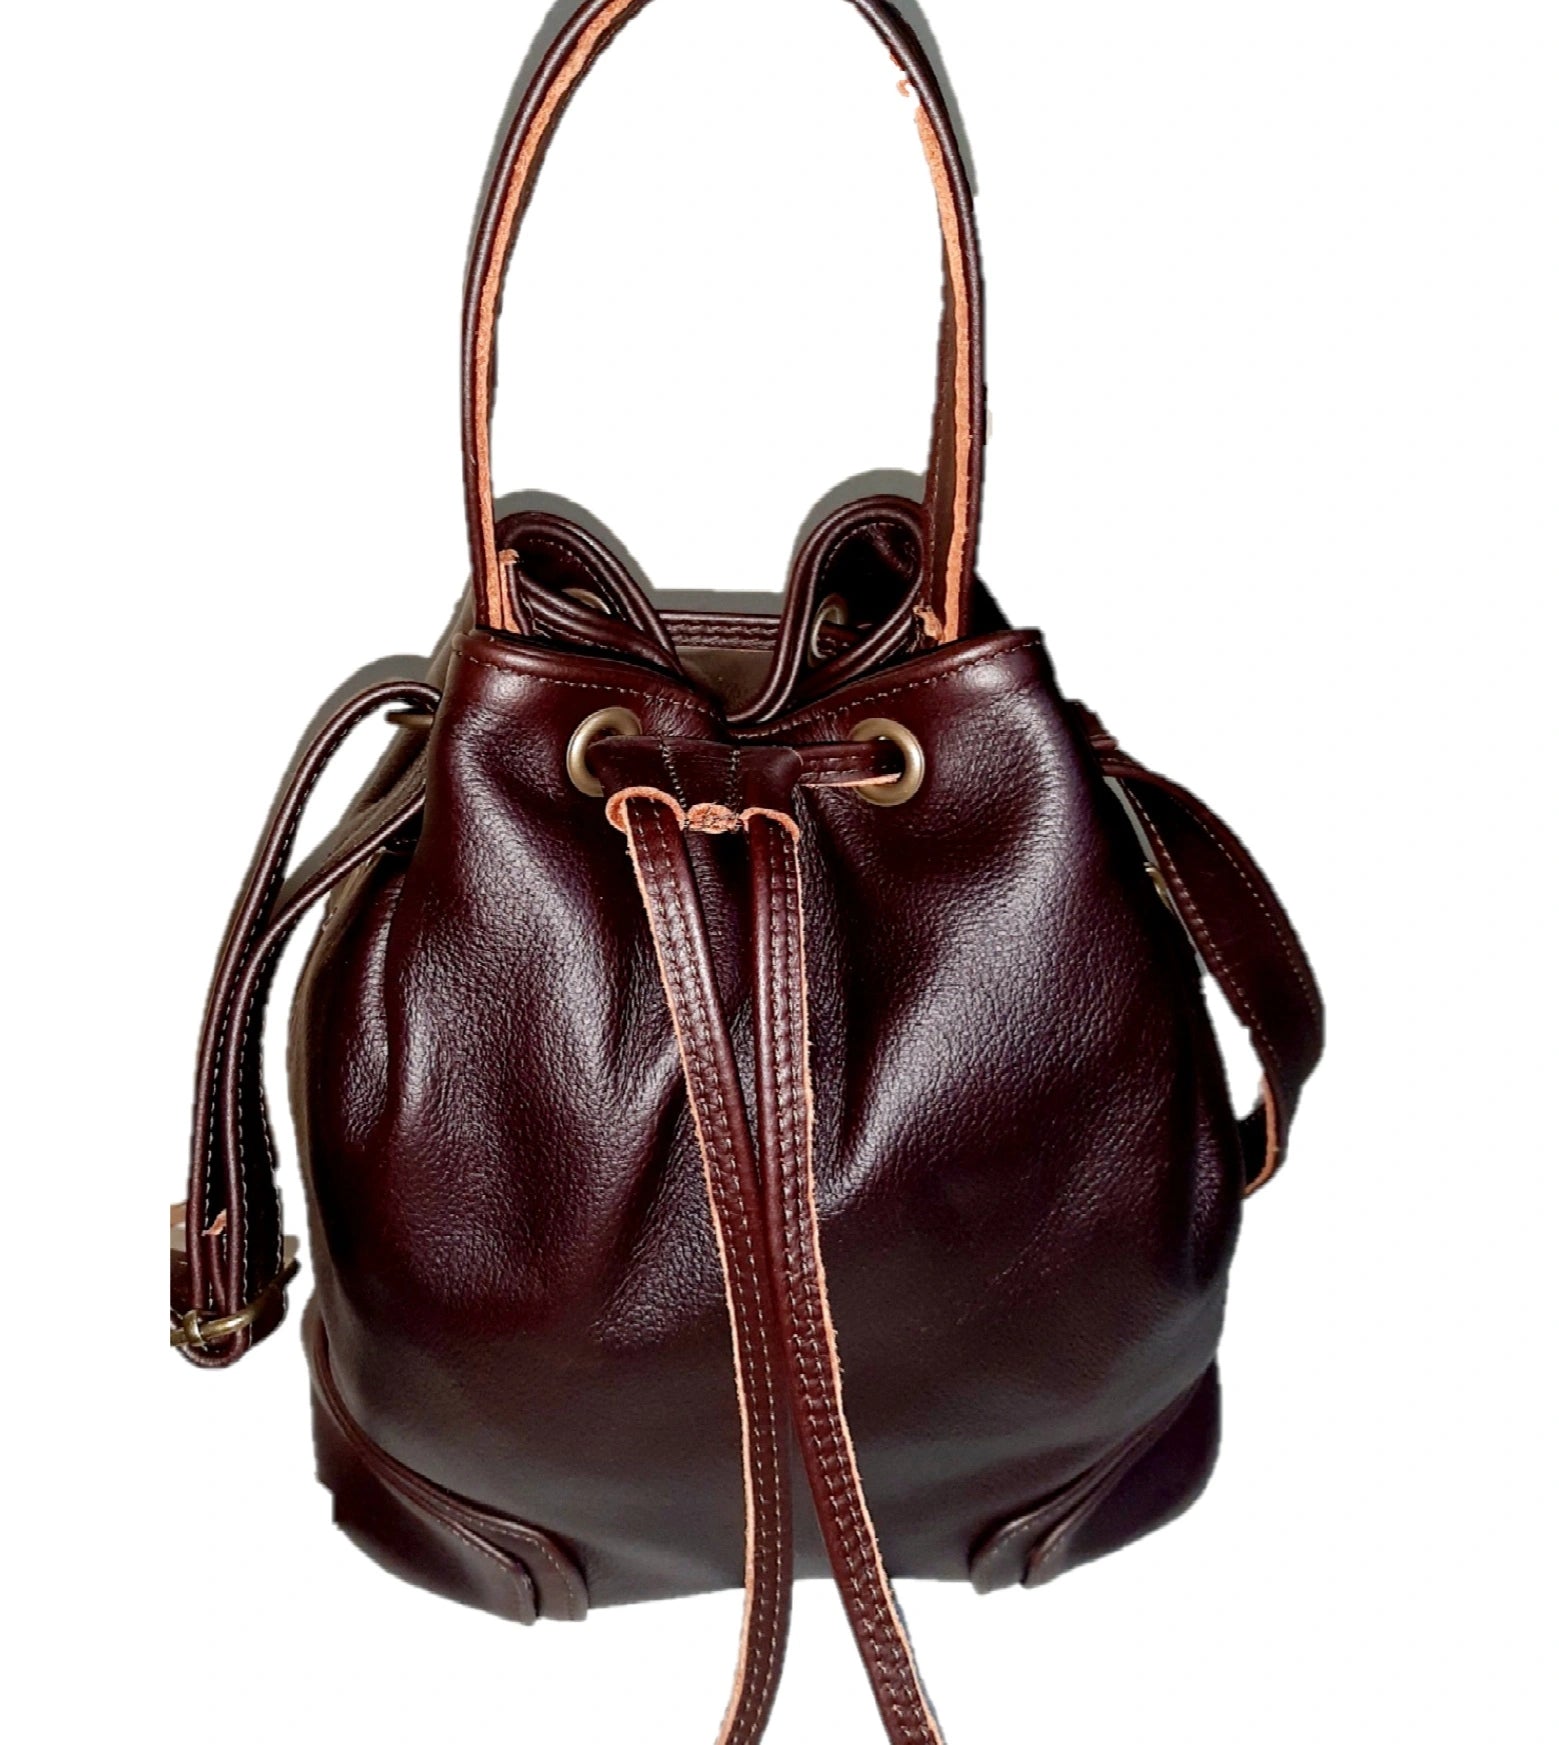 Tin bucket bags dark tan is genuine leather hand made products by Cape Masai  Leather in Cape Town  South Africa.